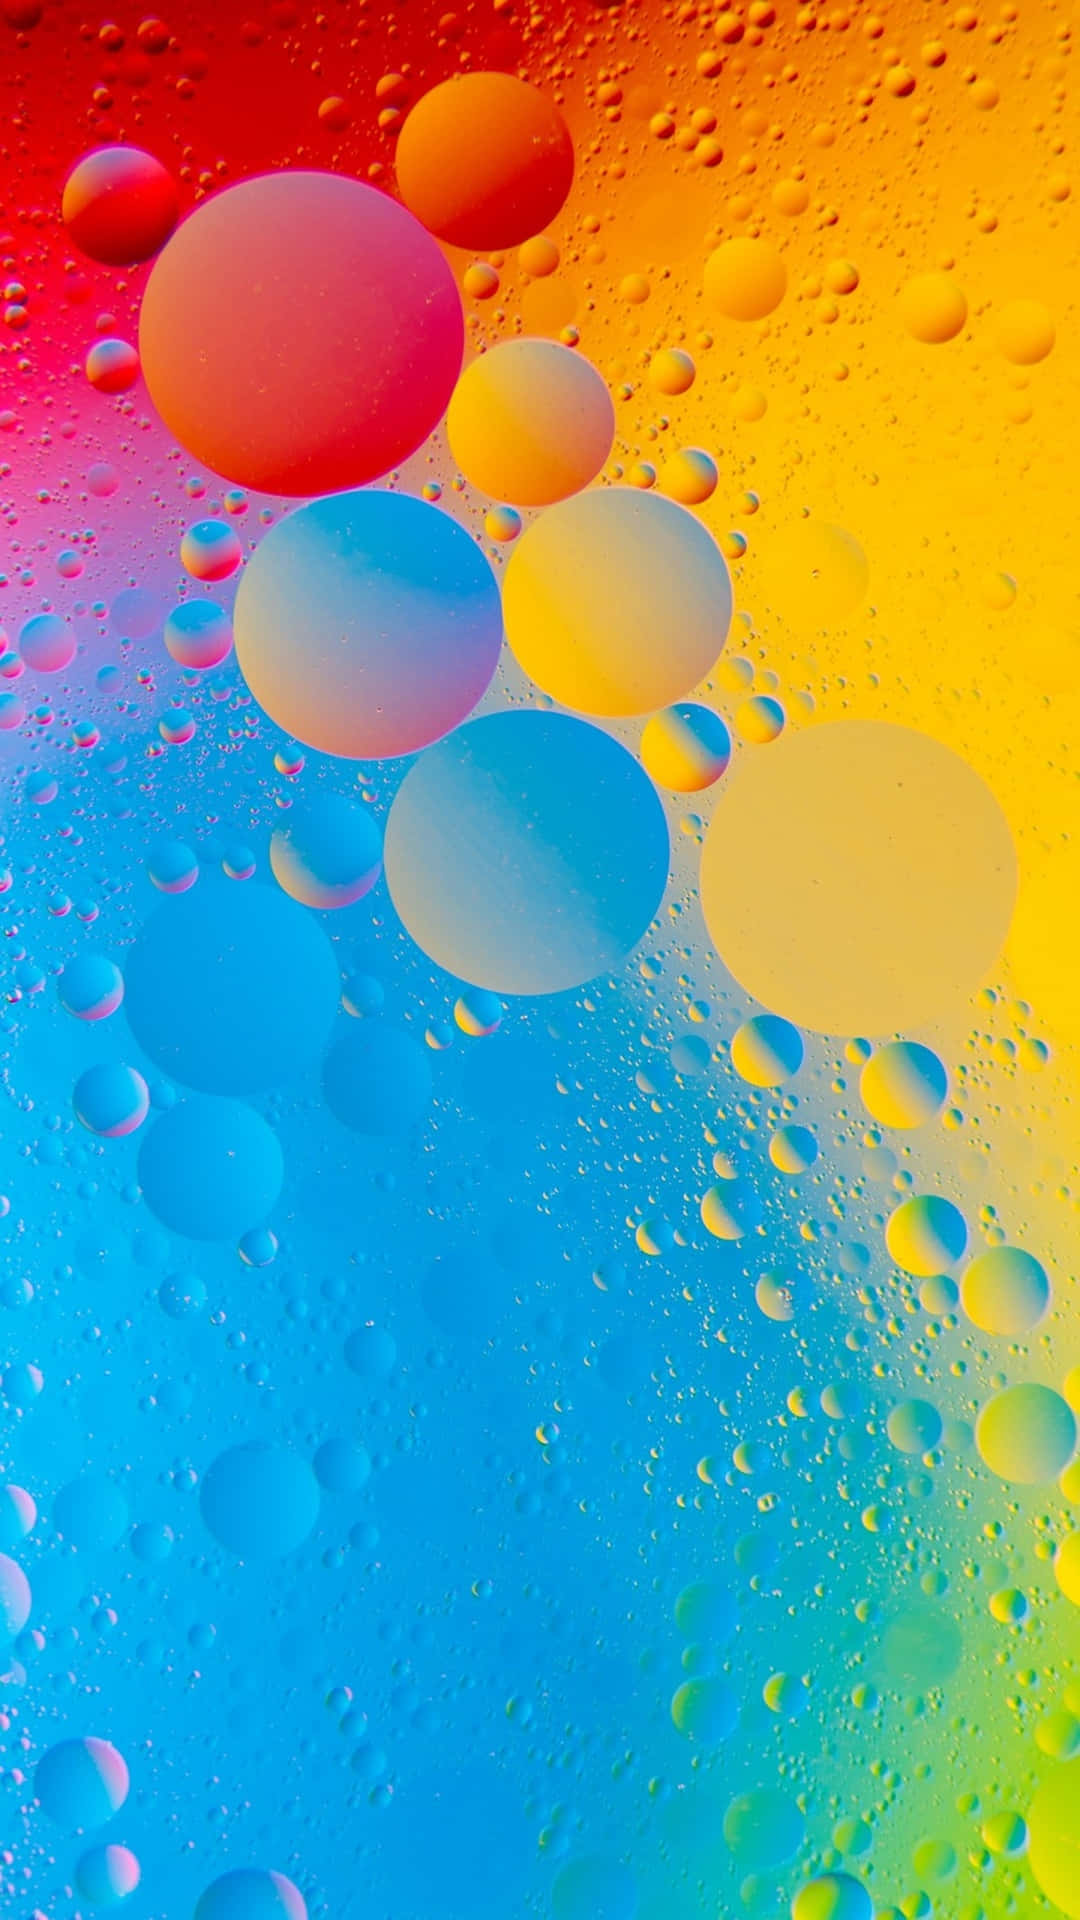 Magnificent View of Colorful 4k Water Droplet Abstract Art for Phone Wallpaper